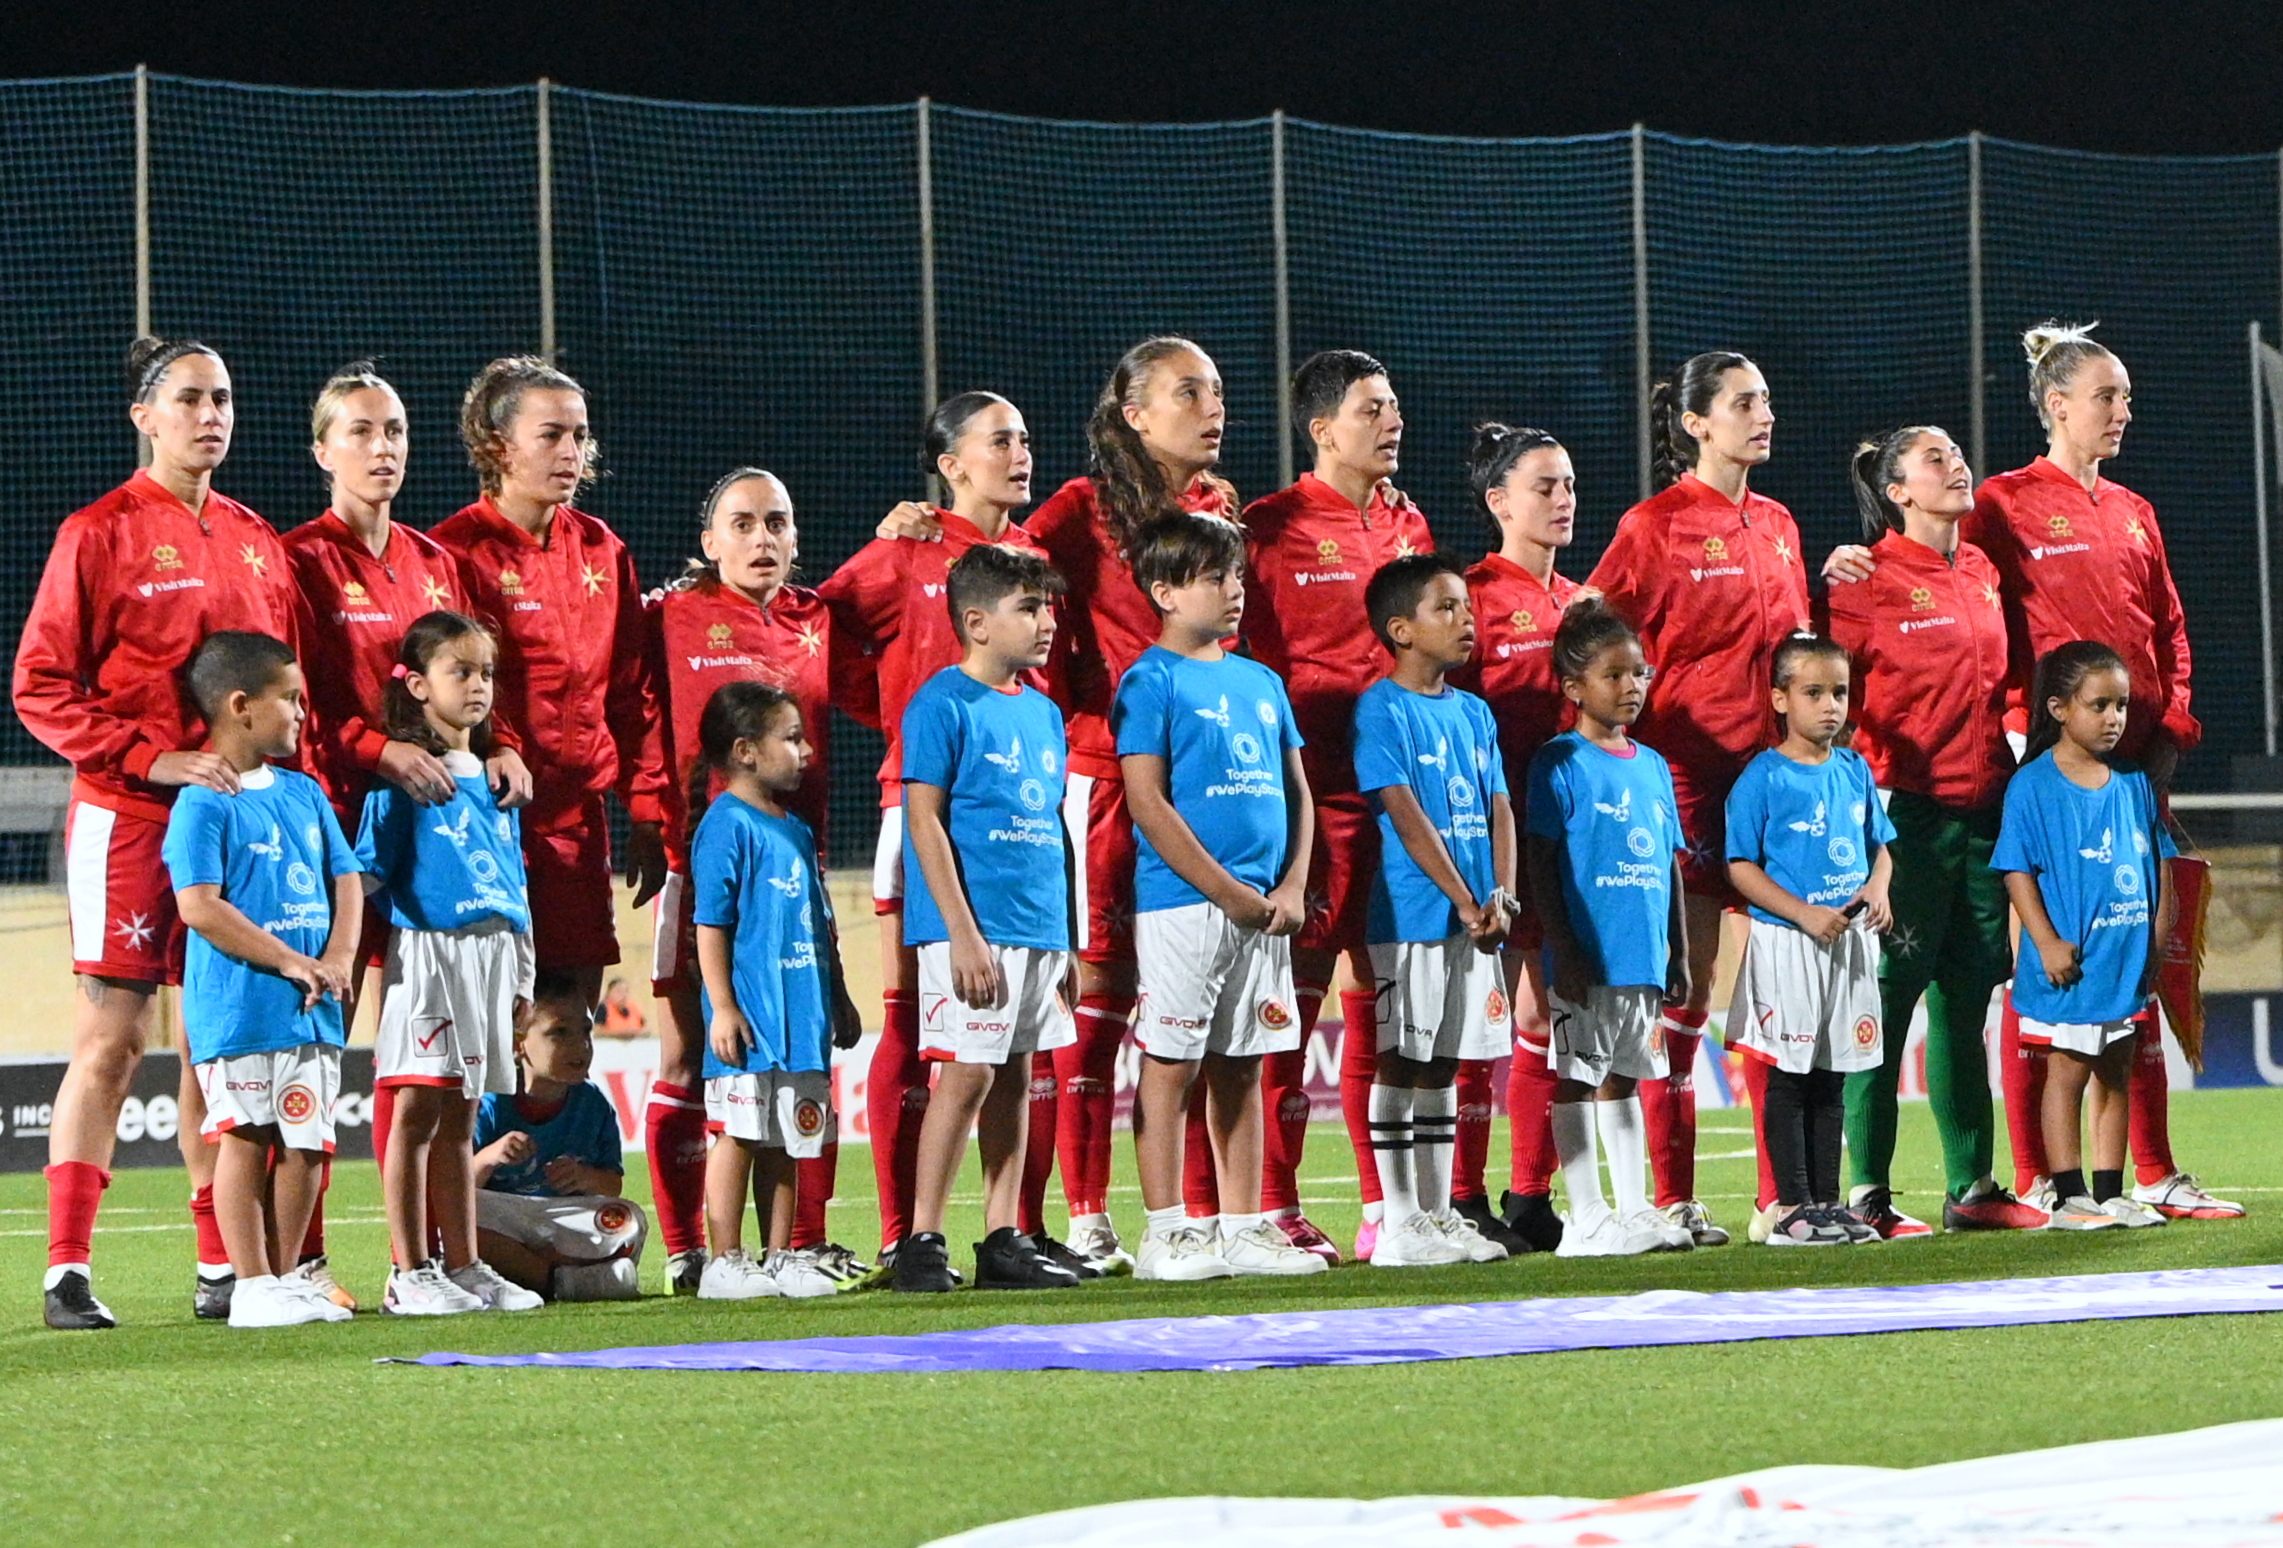 MFPA, Malta FA sign revised MOU for women’s national team